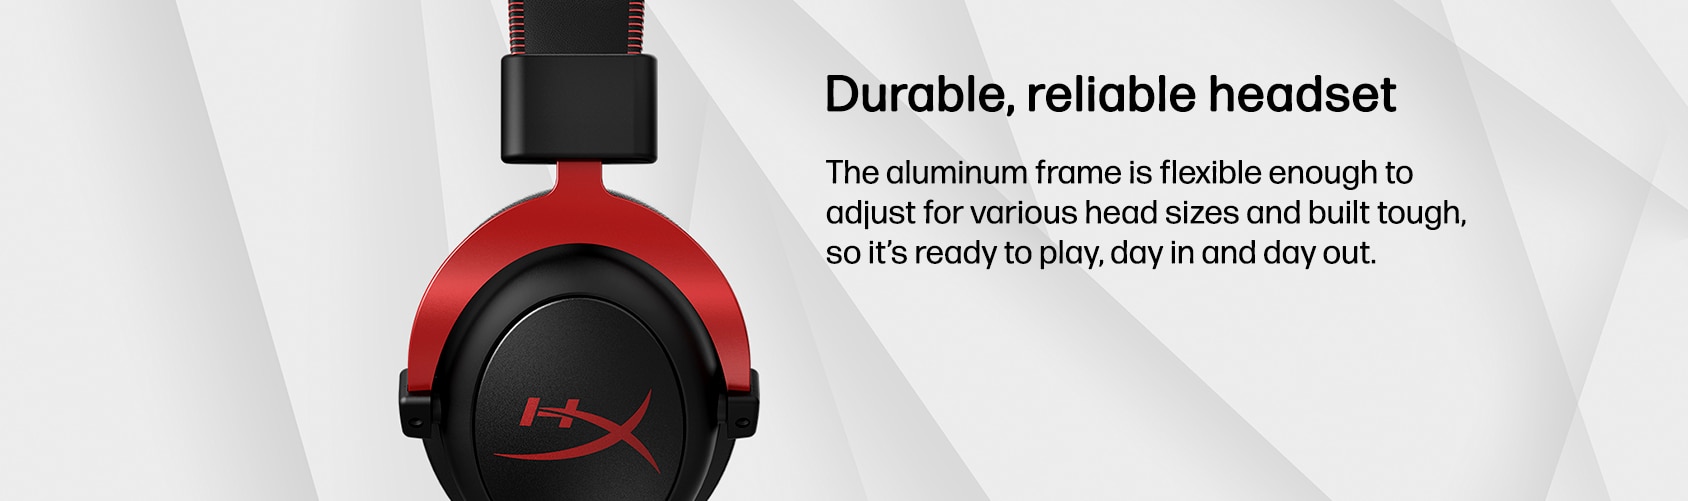 Durable, reliable headset